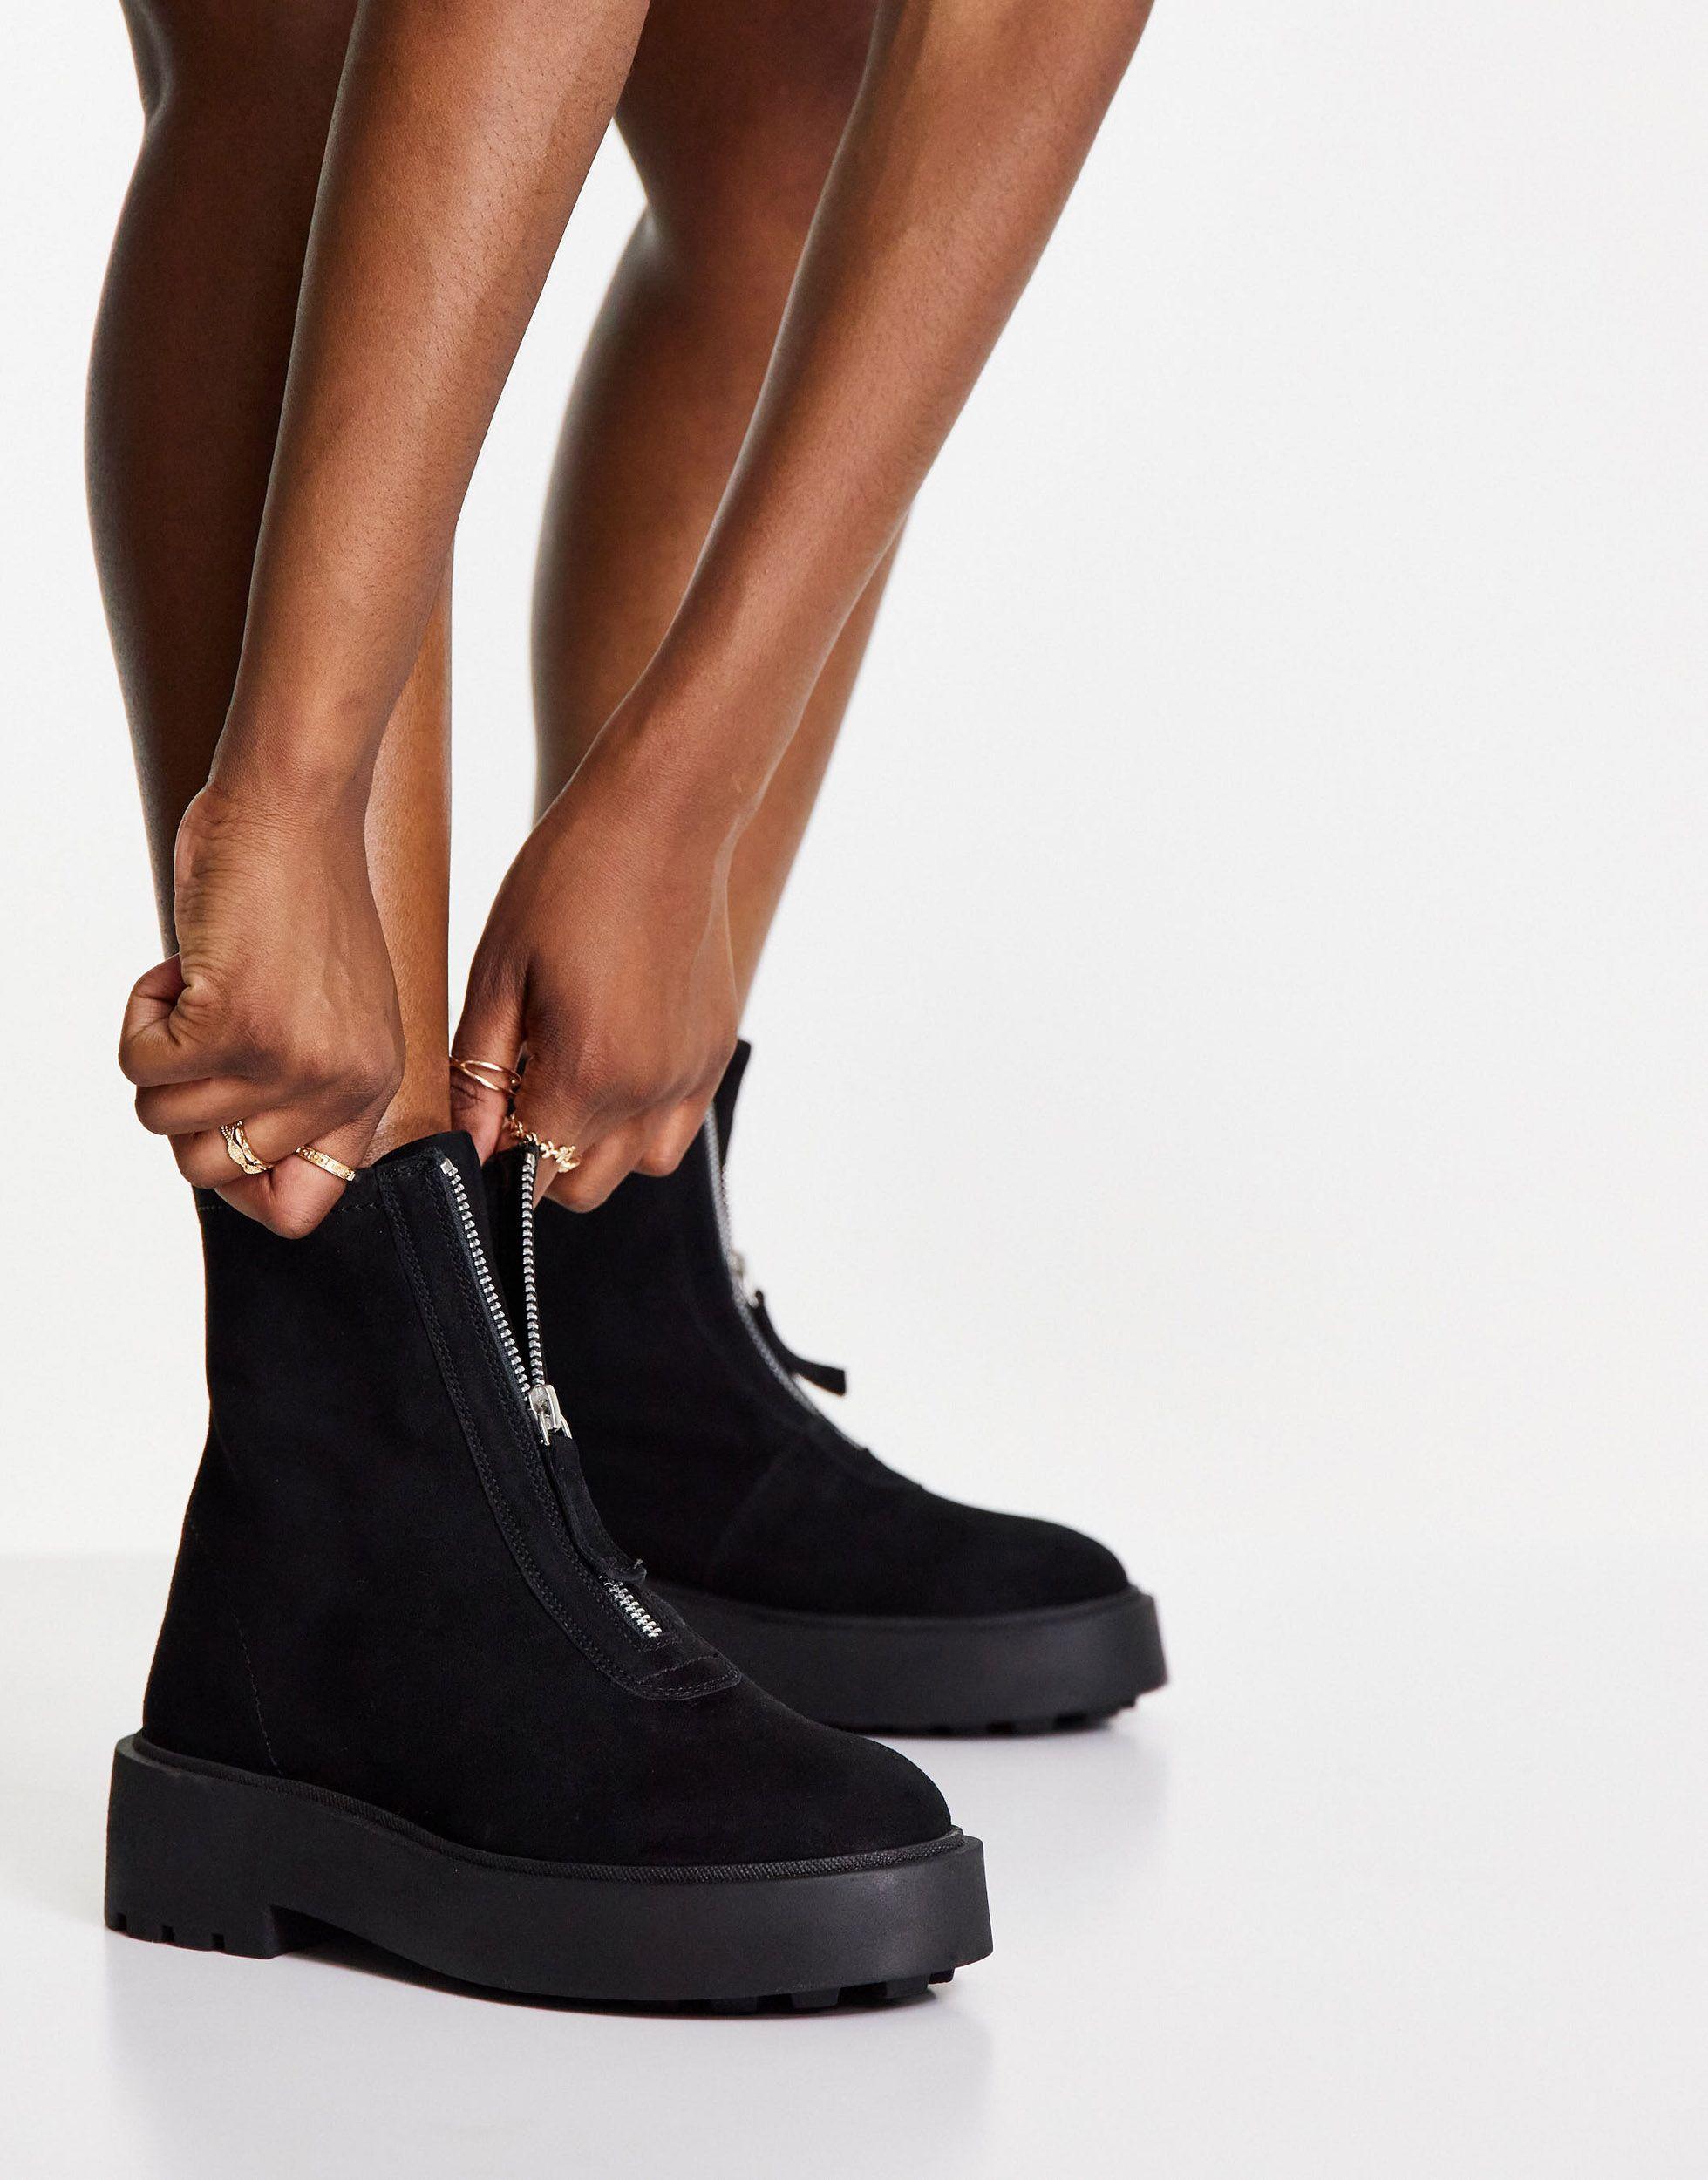 ASOS Ava Leather Front Zip Boots in Black - Lyst